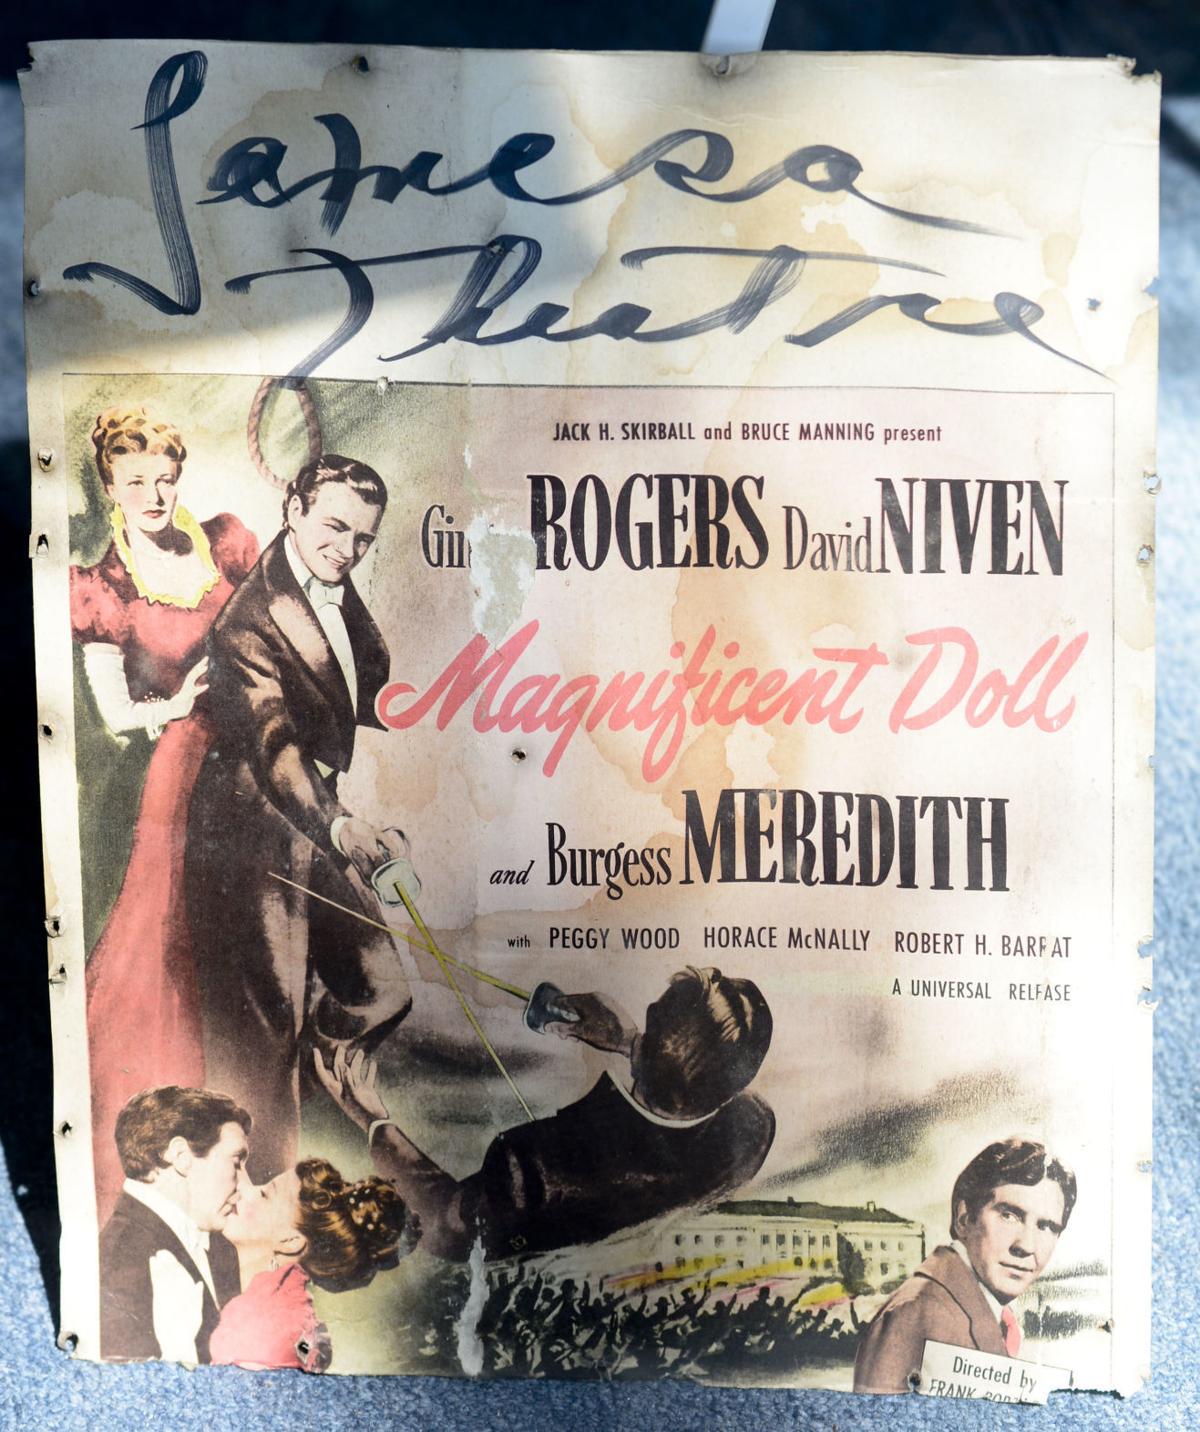 Photos: Old movie posters found in walls of Lompoc Theatre | Local News